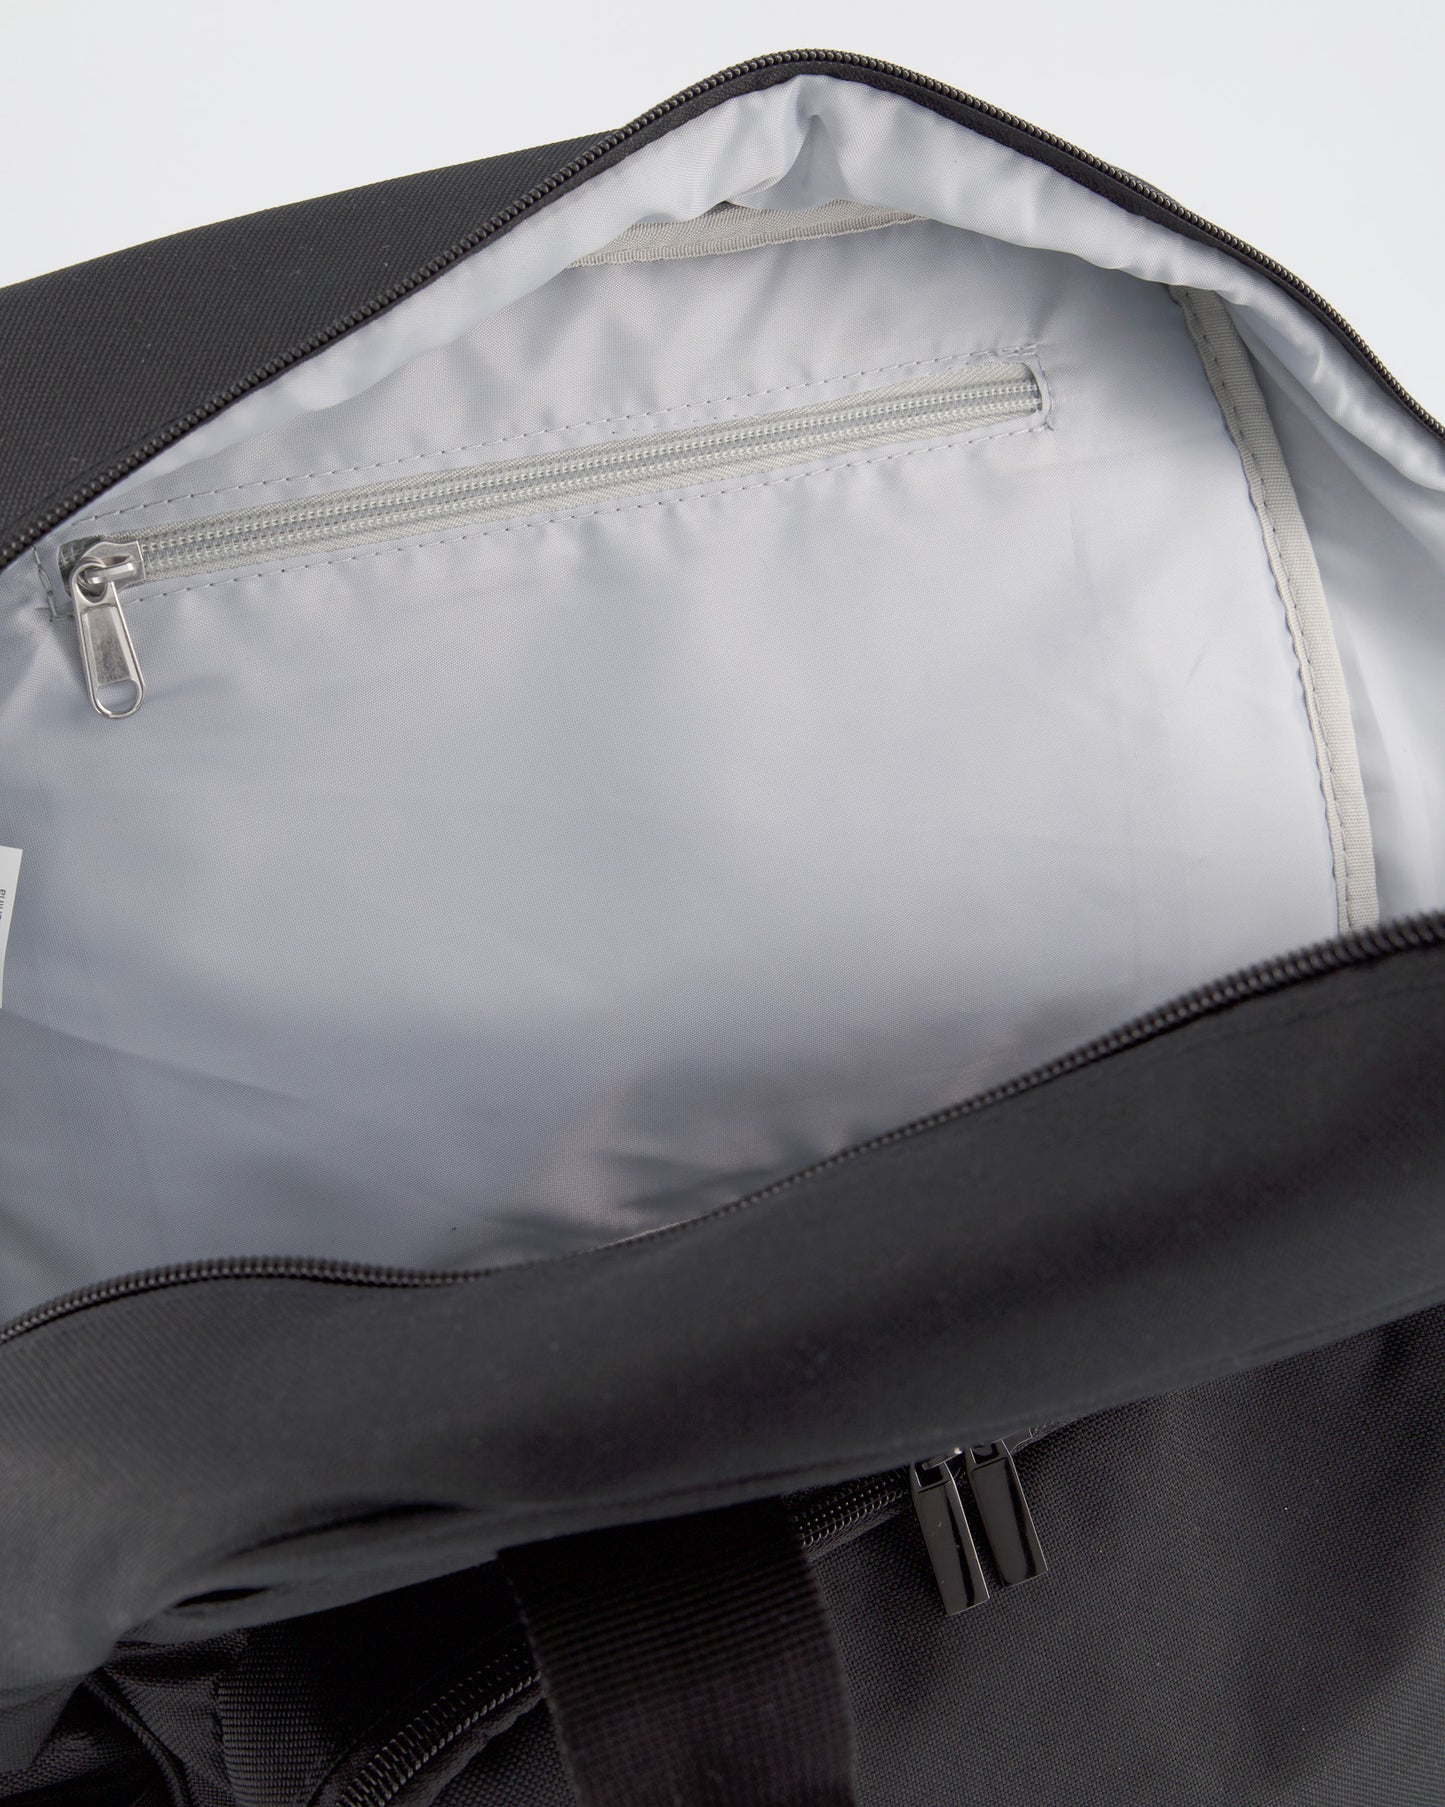 The Camy Nappy Backpack (Midnight Black)